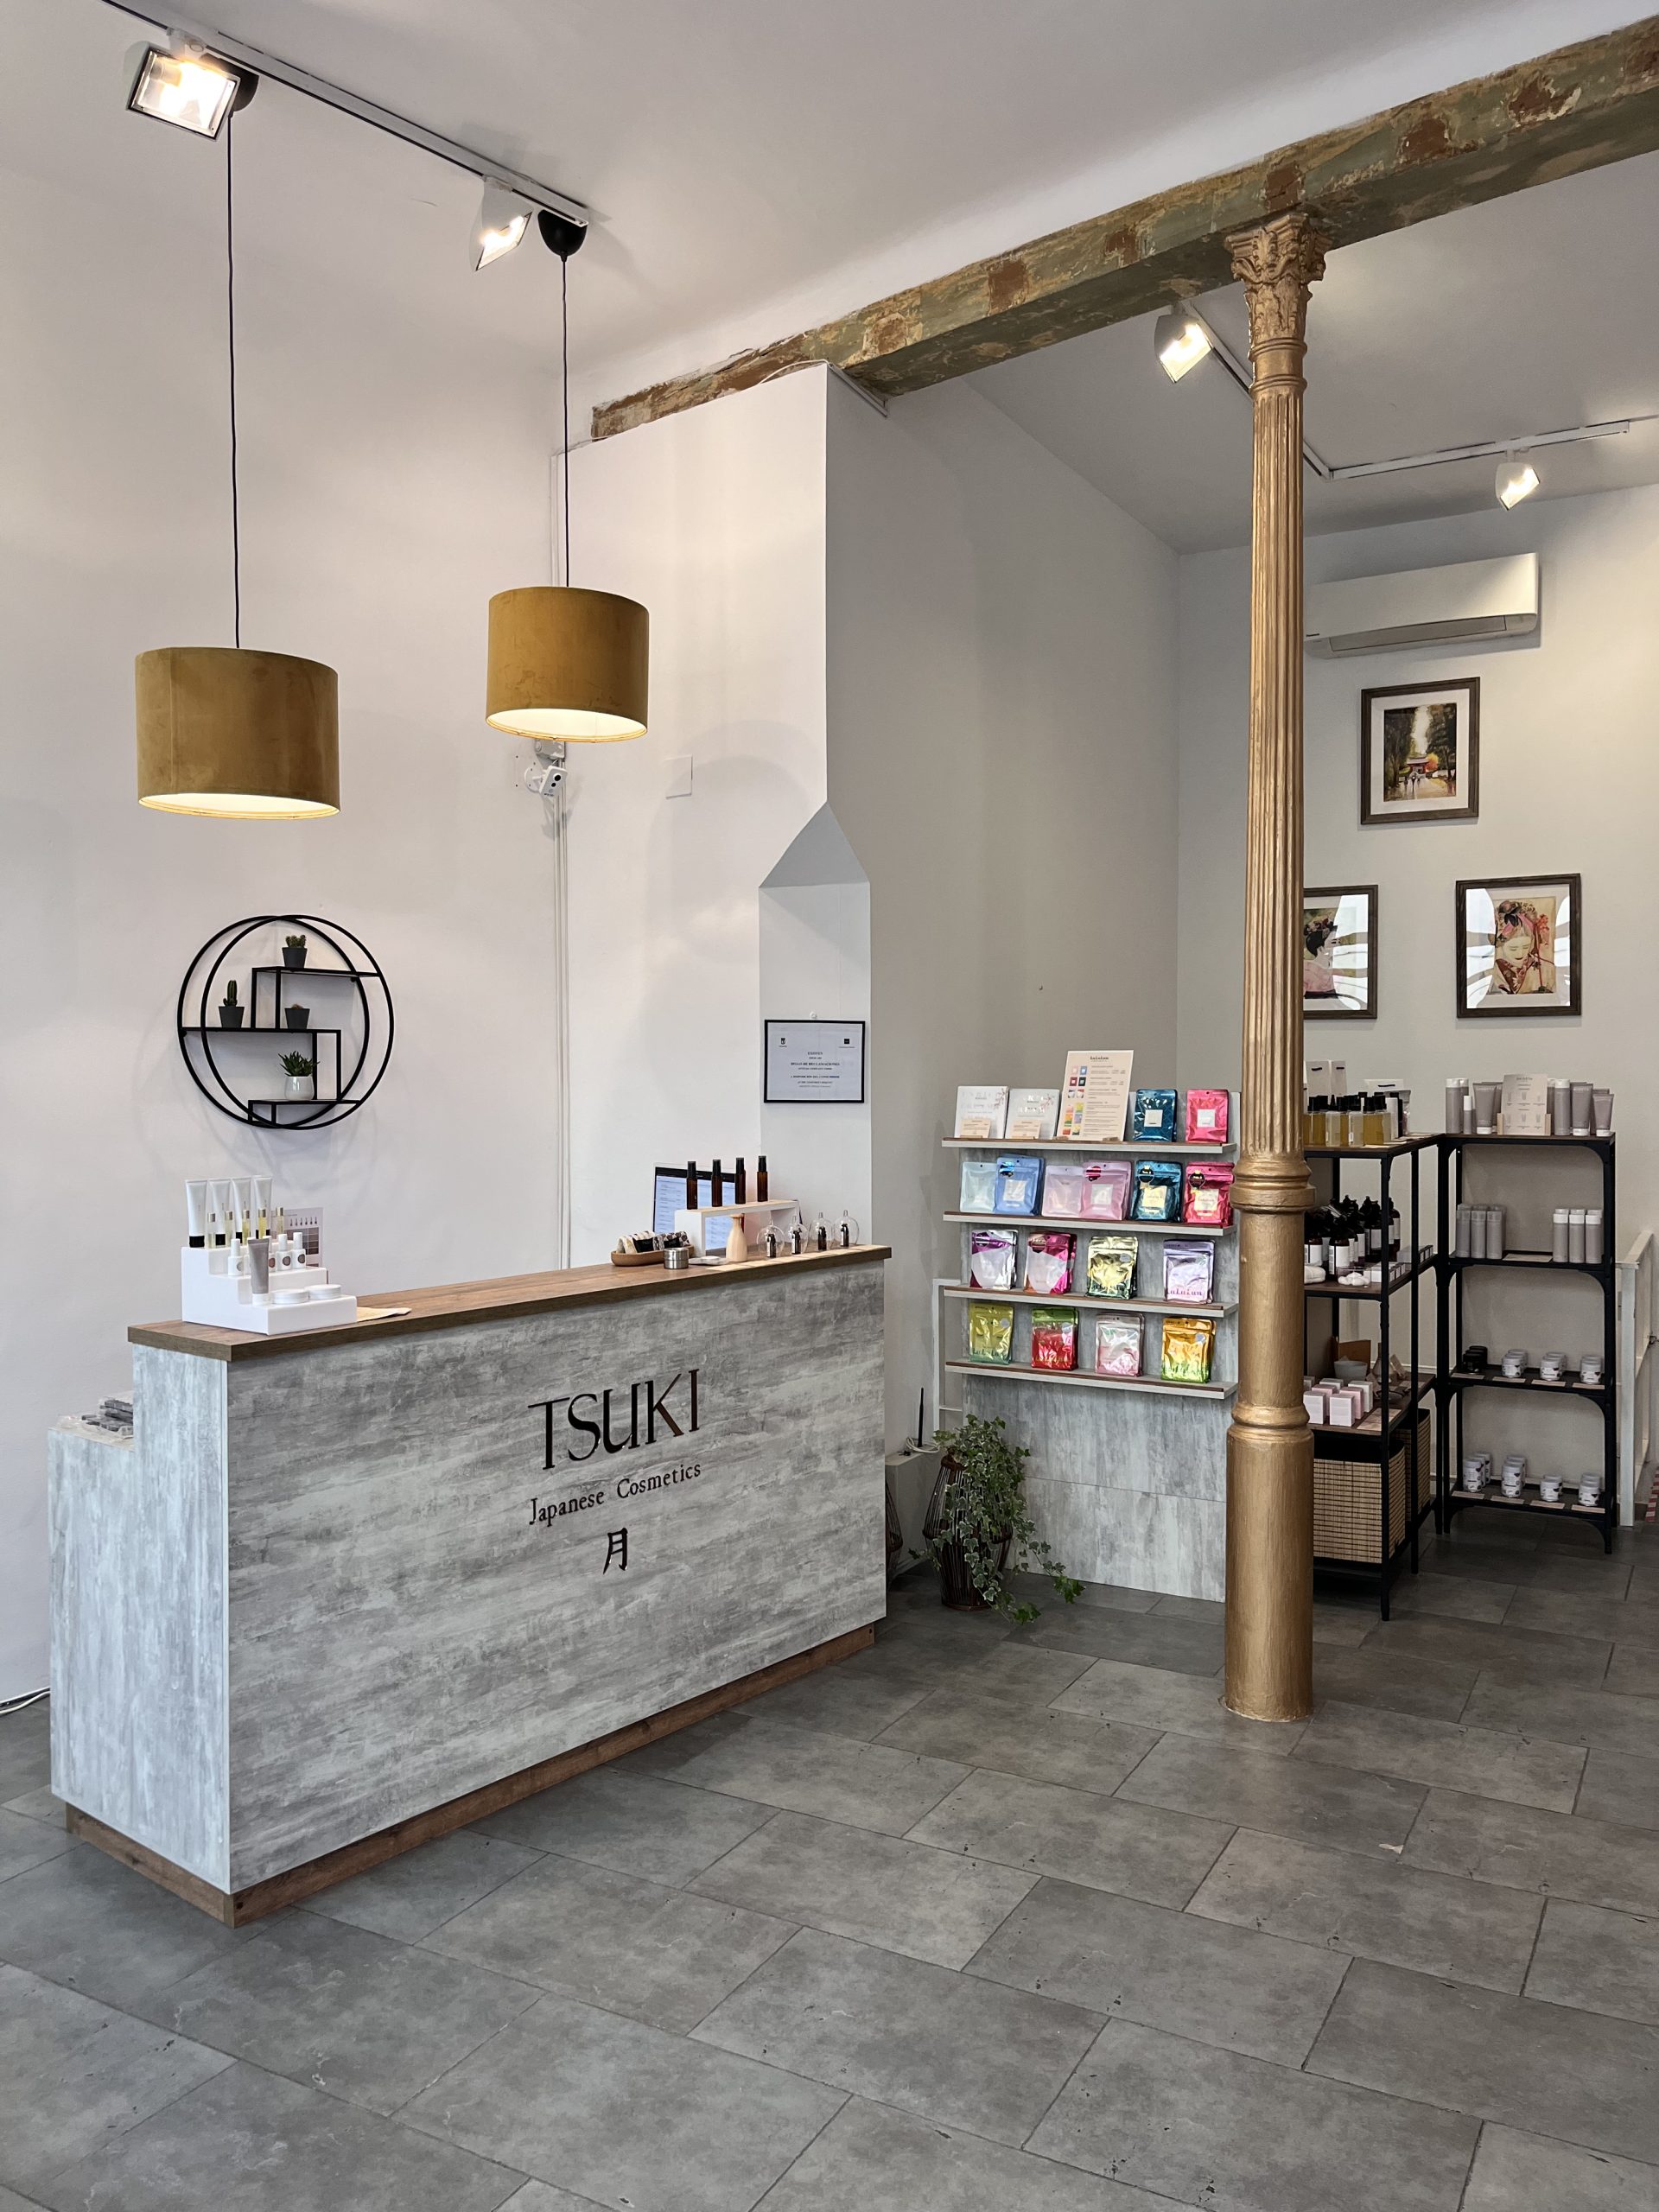 J-Beauty report from Europe Vol. 8: TSUKI Cosmetics reveals and develops the underlying strength of J-Beauty in Spain